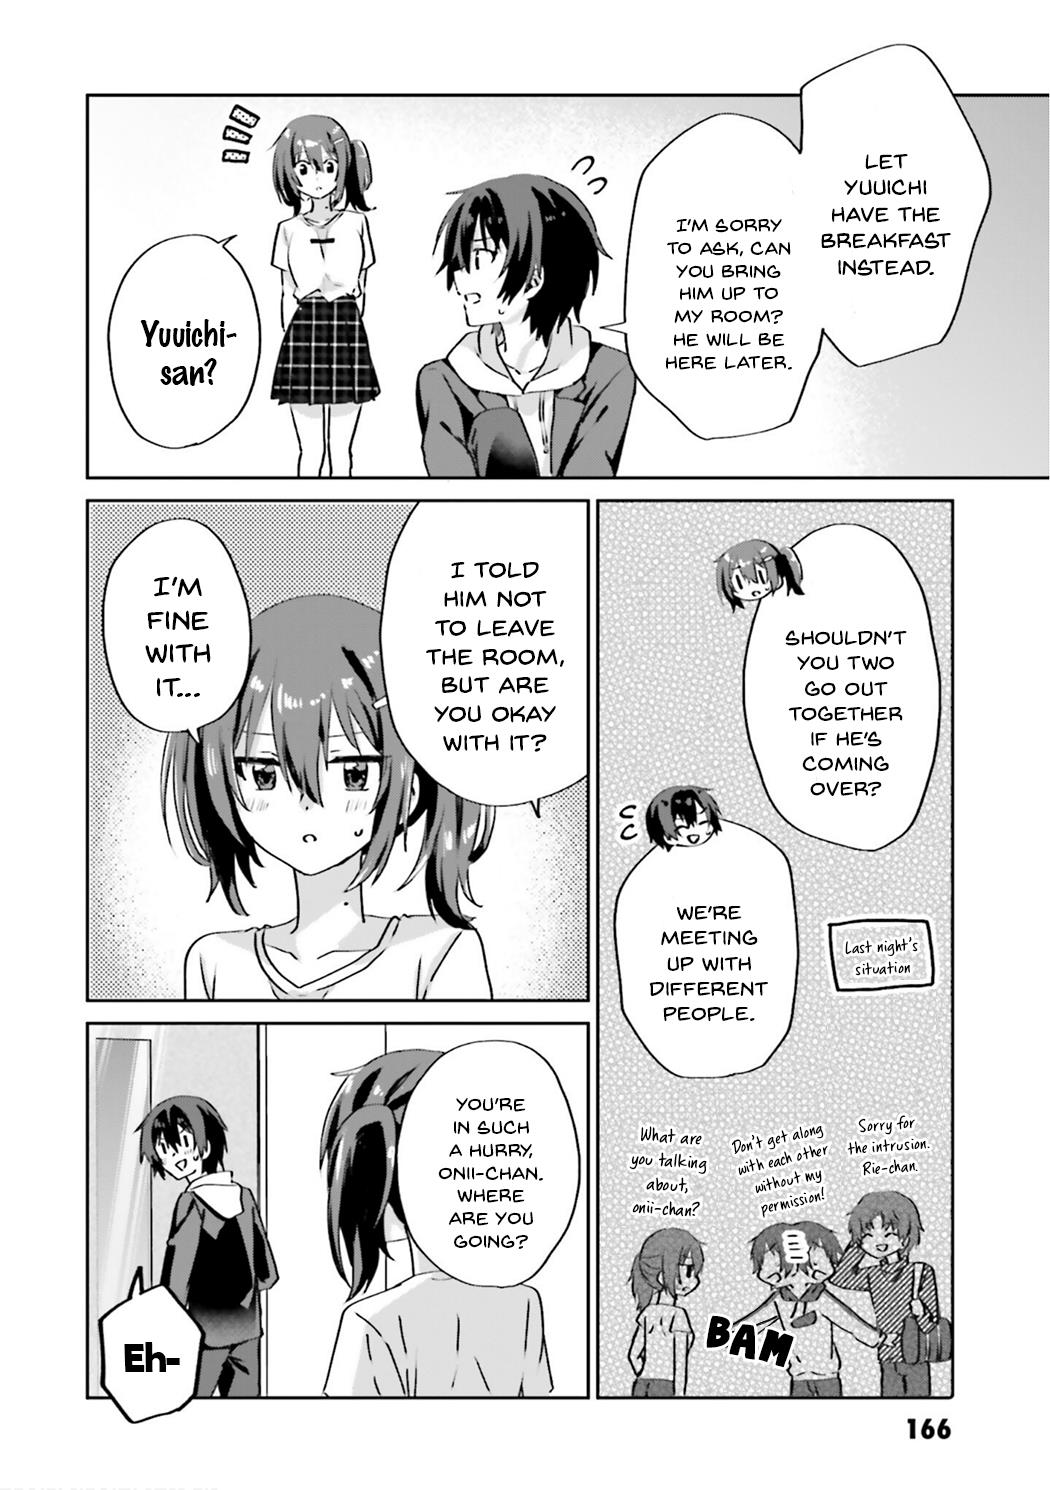 Since I’Ve Entered The World Of Romantic Comedy Manga, I’Ll Do My Best To Make The Losing Heroine Happy Vol.1 Chapter 6.5: Vol.1 Extras - Picture 2